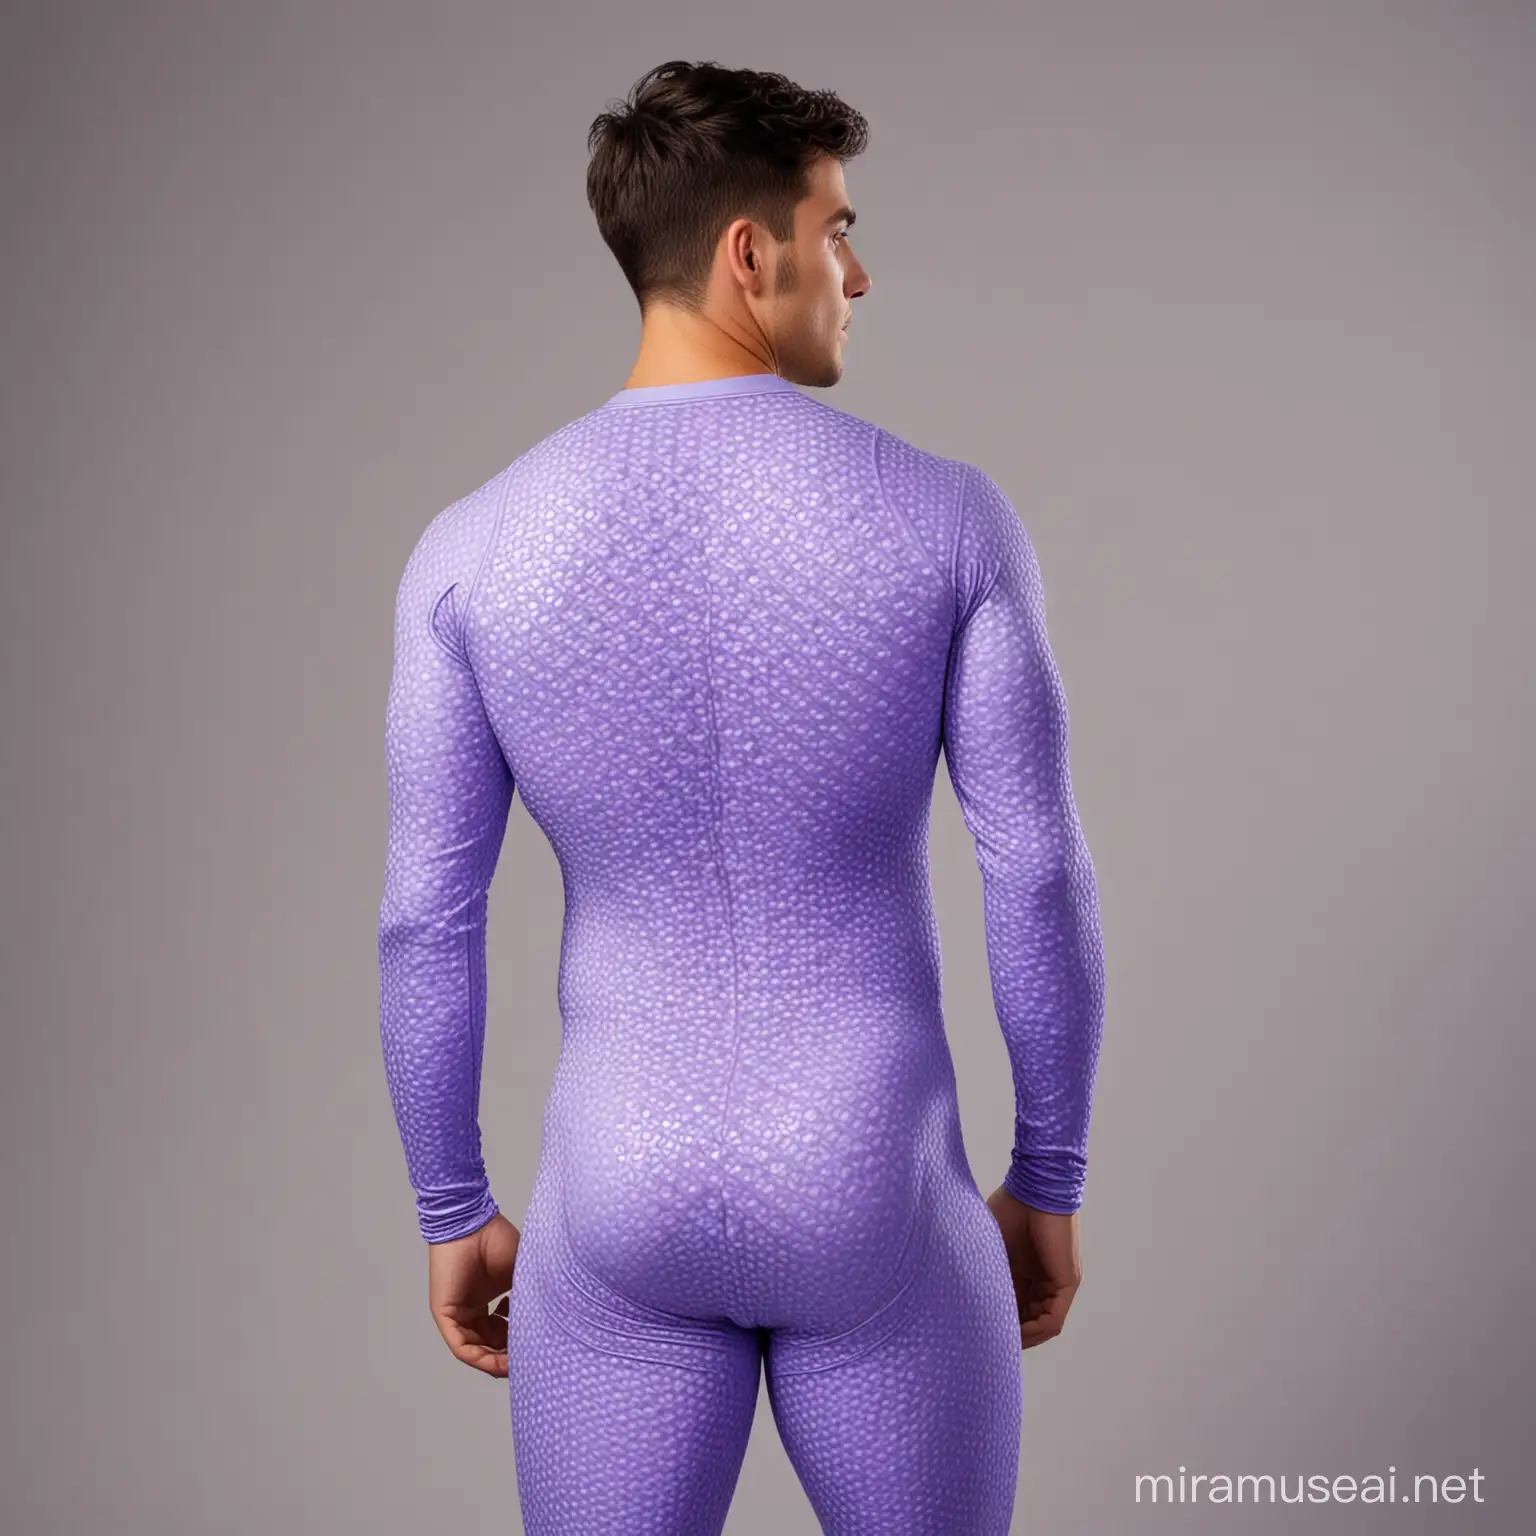 Handsome dorky 27 year old American man; with short black hair and hazel eyes; wearing tight periwinkle hero spandex suit and gloves with honeycomb pattern; well defined buttocks, rear view.